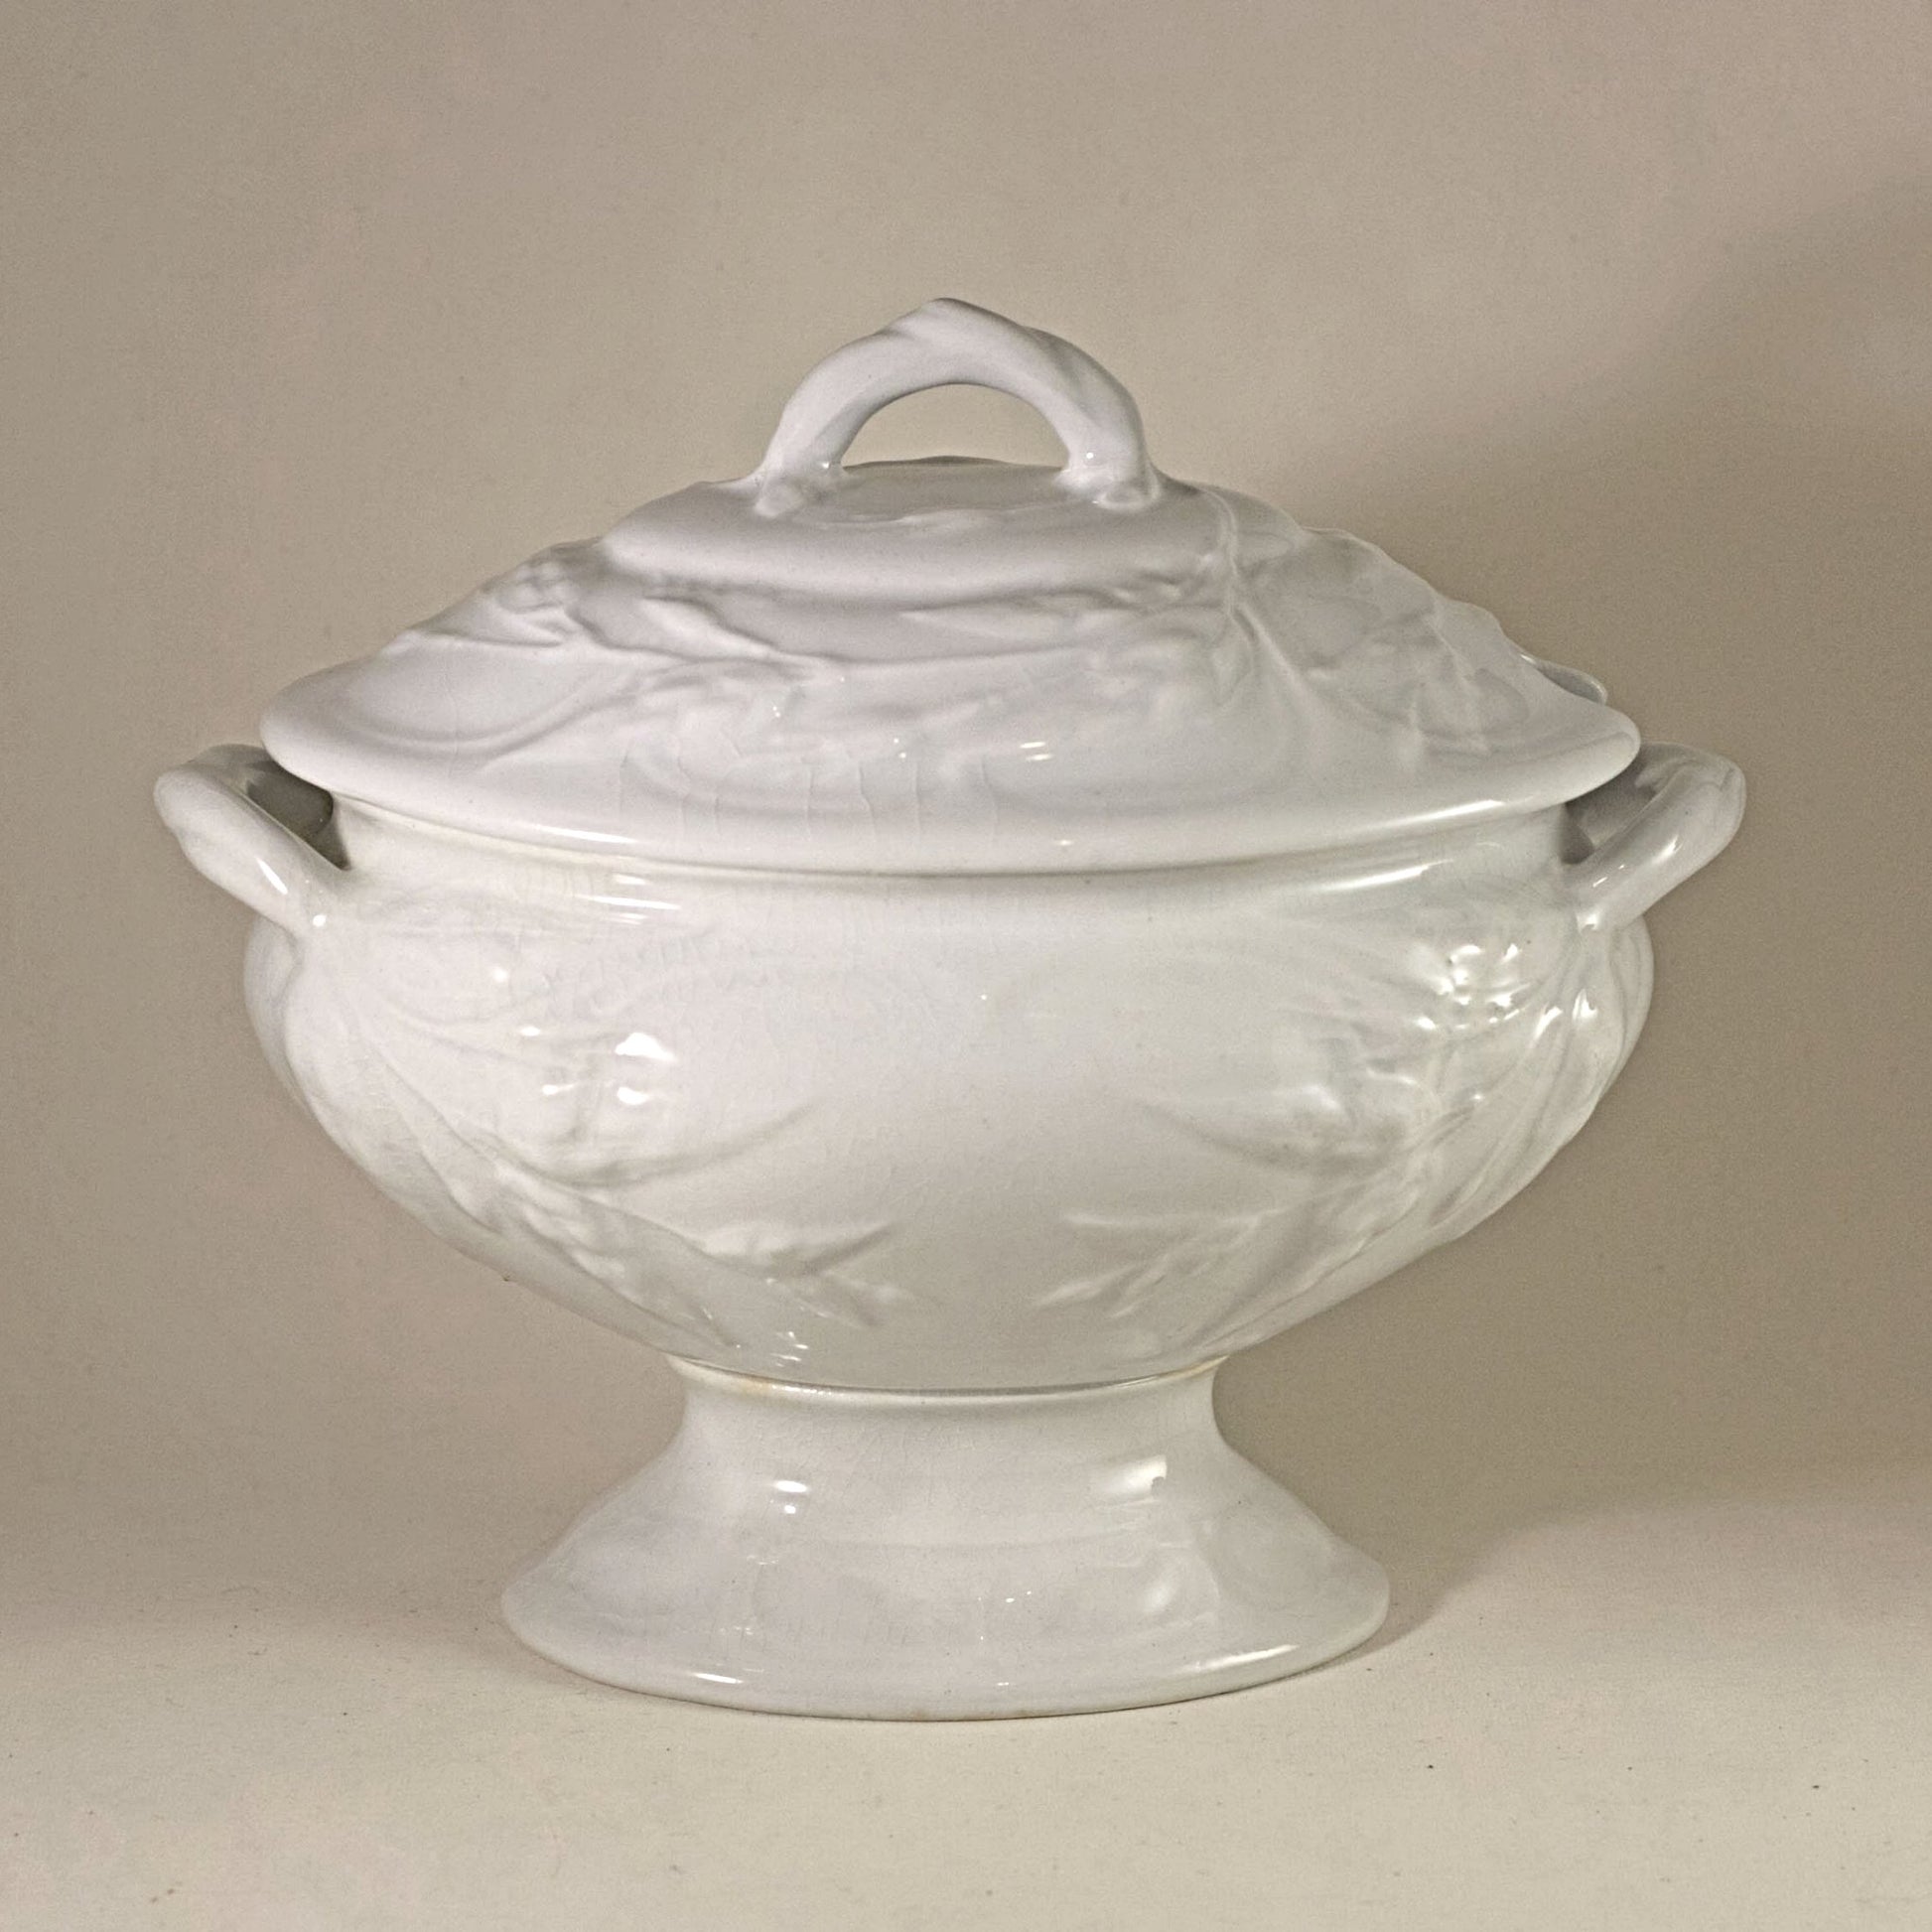 MINIATURE WHITE IRONSTONE Footed Covered Soup Tureen Imported by A De Forest of Ann Arbor Circa 19th Century